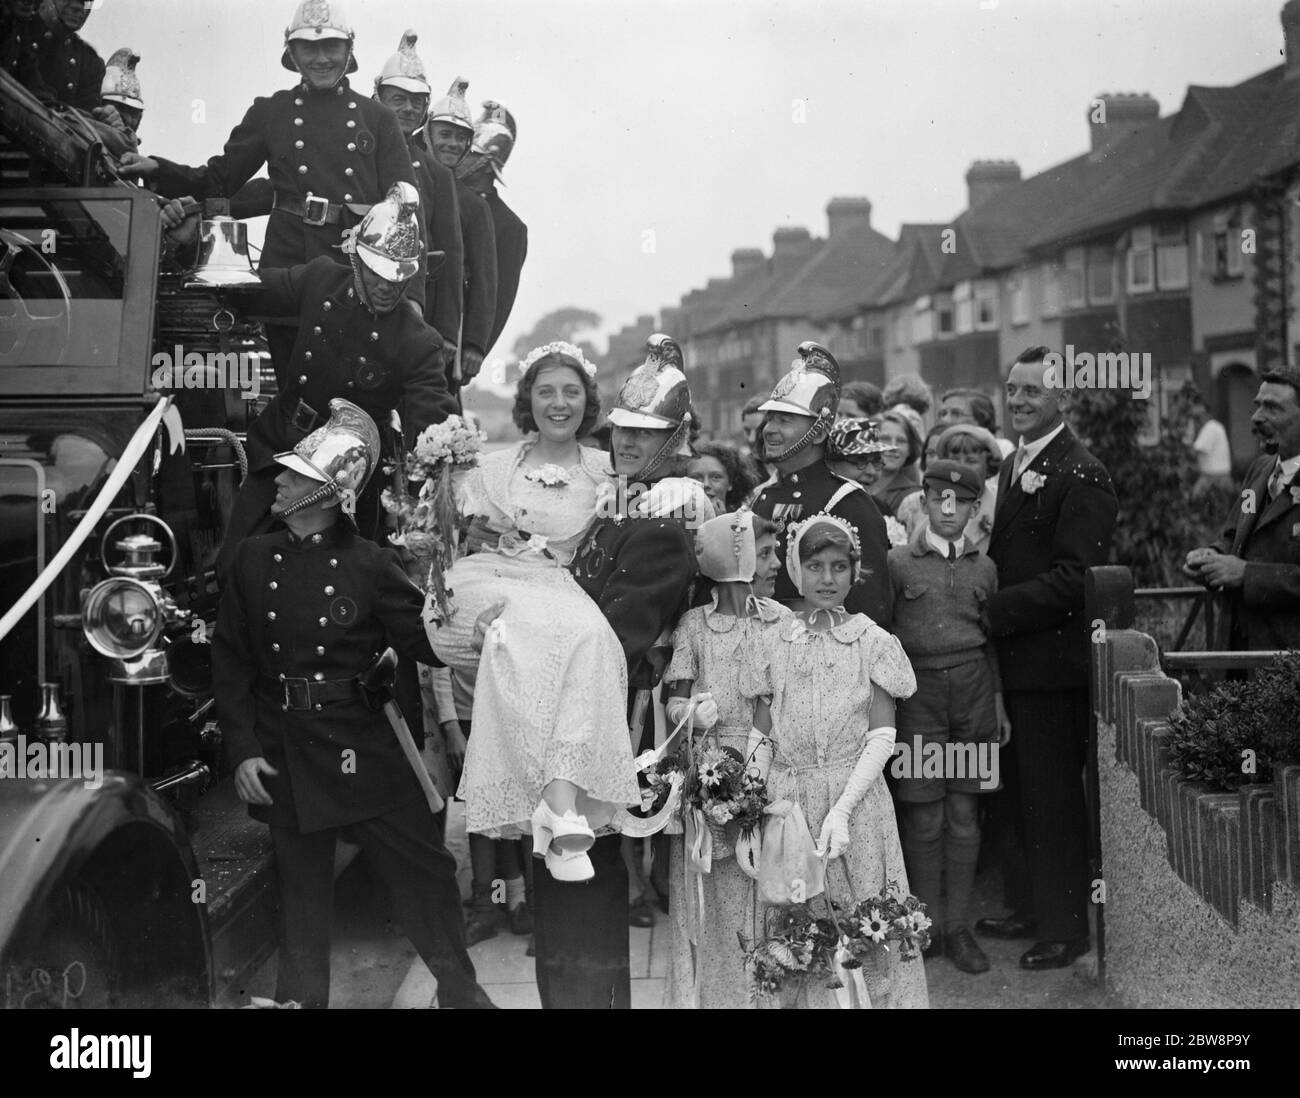 The wedding of firemen A Schofield and Miss E Gifford . The bride is being carried to their wedding vehicle . 1938 Stock Photo